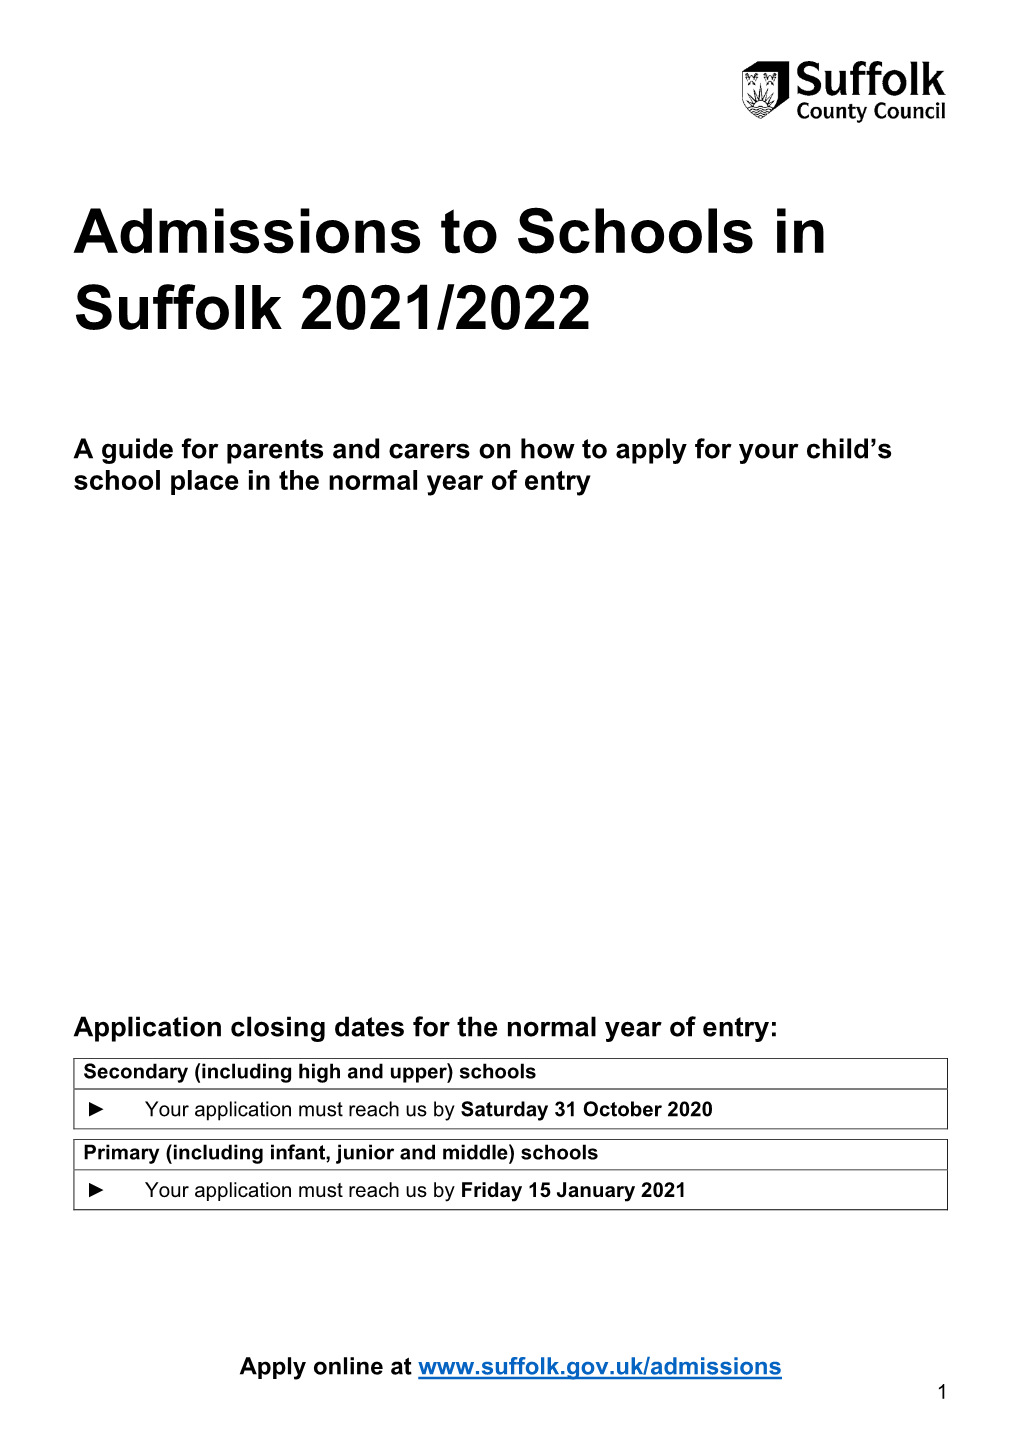 Admissions to Schools in Suffolk 2021/2022